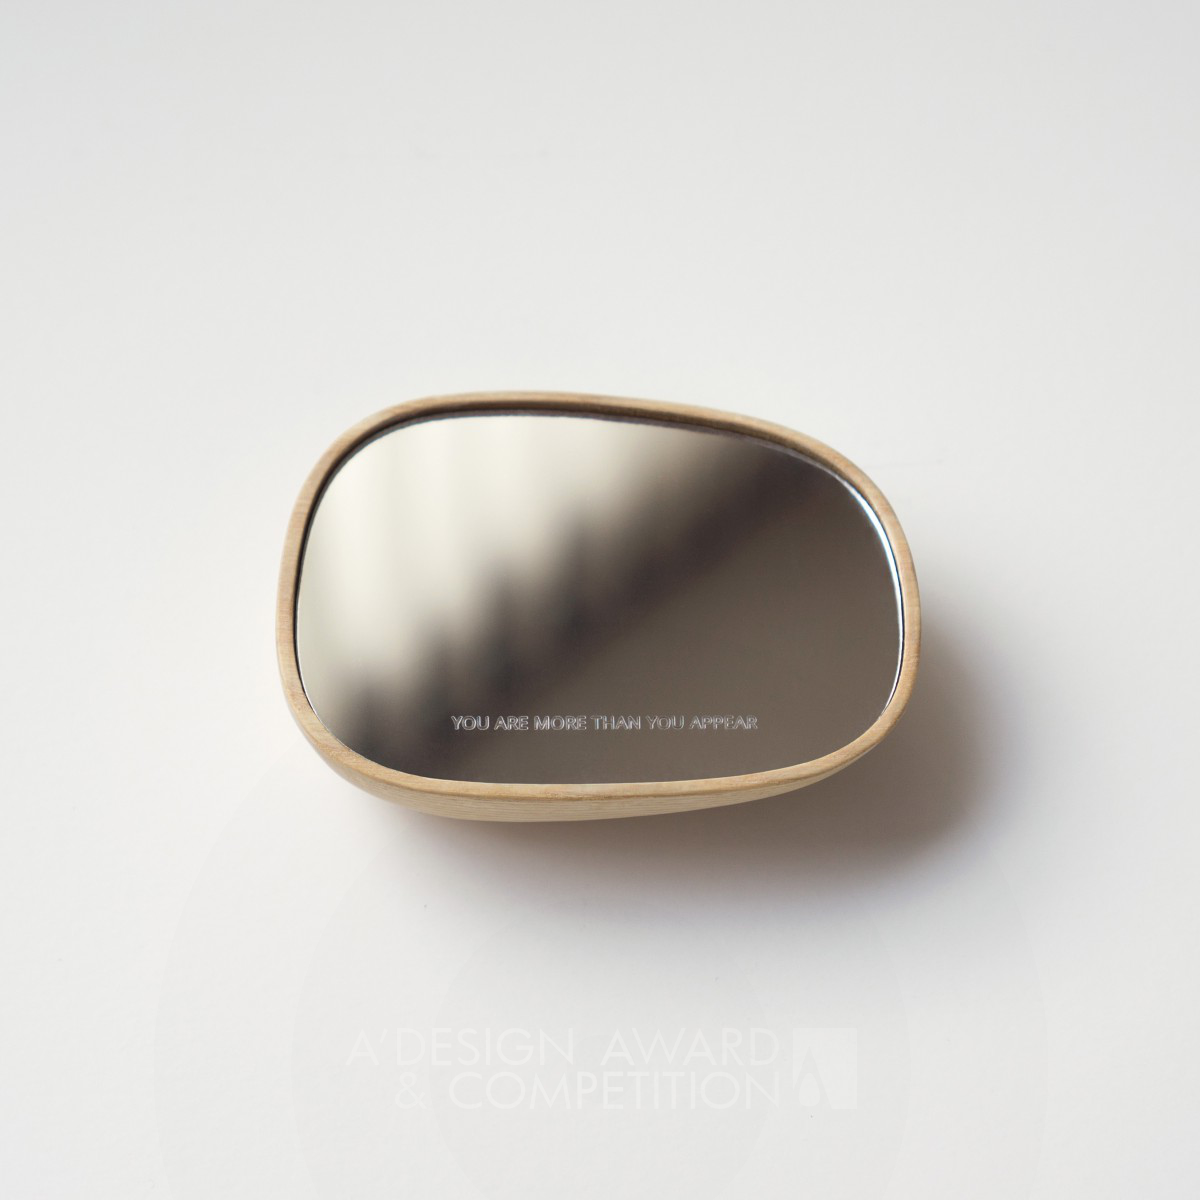 Beyond: A Hand Mirror Inspired by a Wing Mirror